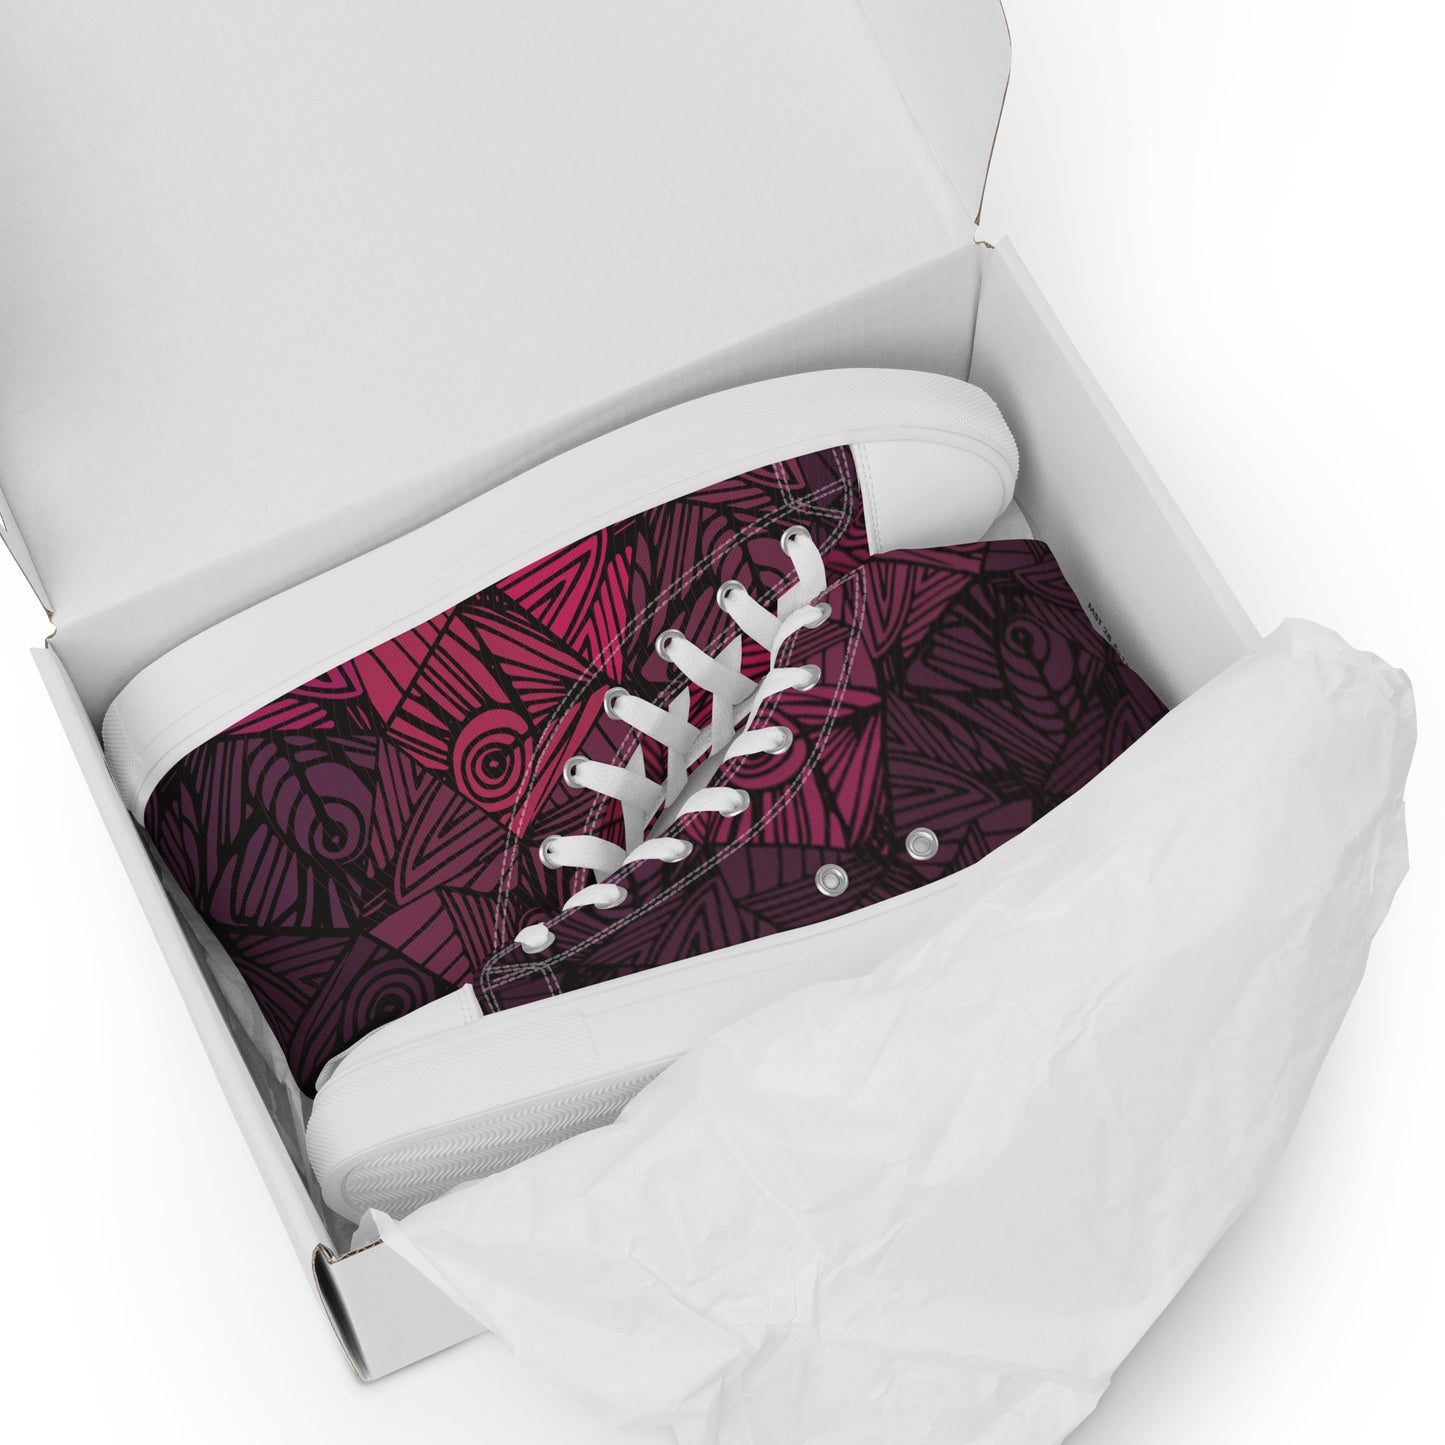 Worldtown Guaranteed To Dream Women’s High Top Canvas Shoes